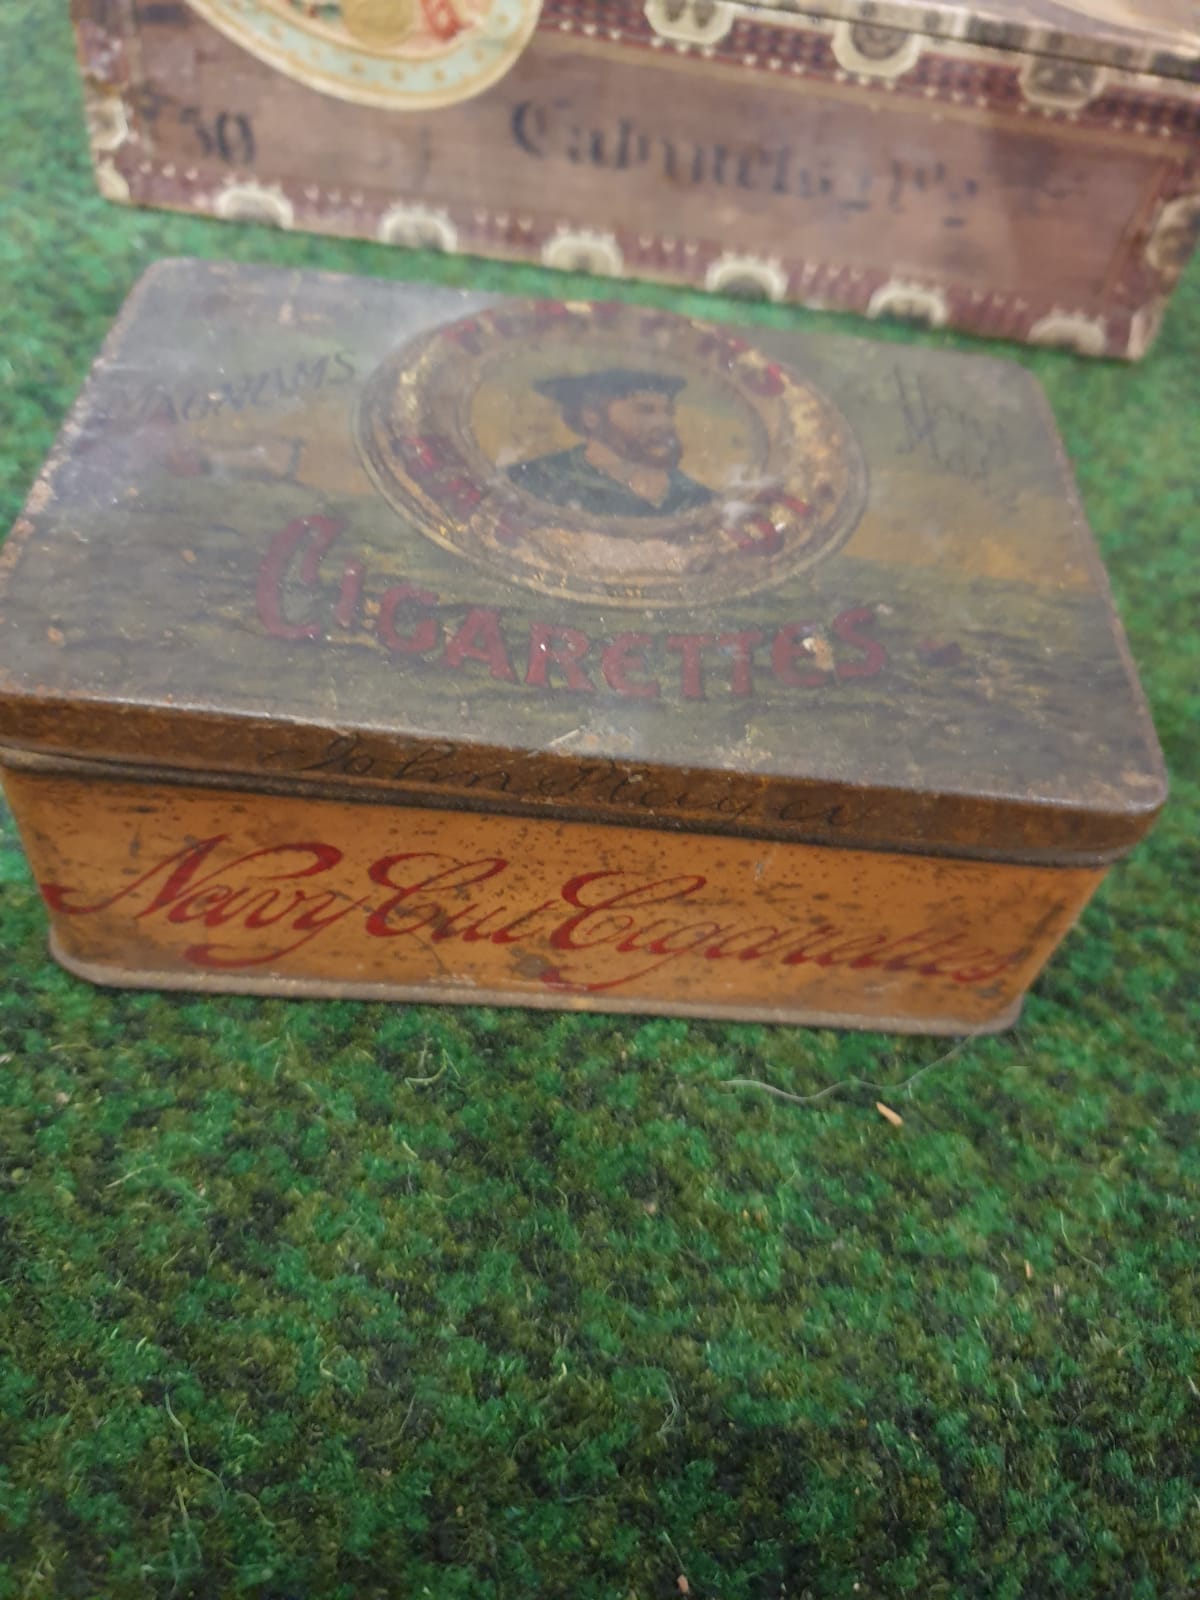 2 x vintage tobacco boxes Antique Players Navy Cut 50 Cigarettes Tin from Player & Sons in - Image 2 of 2